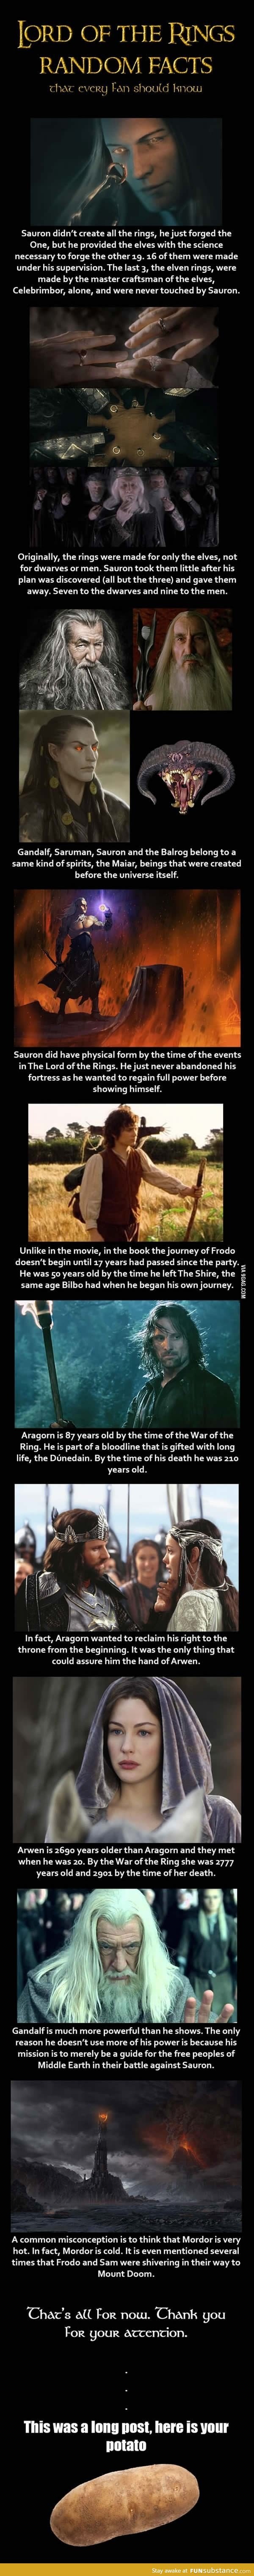 Lord of the Rings Random Facts